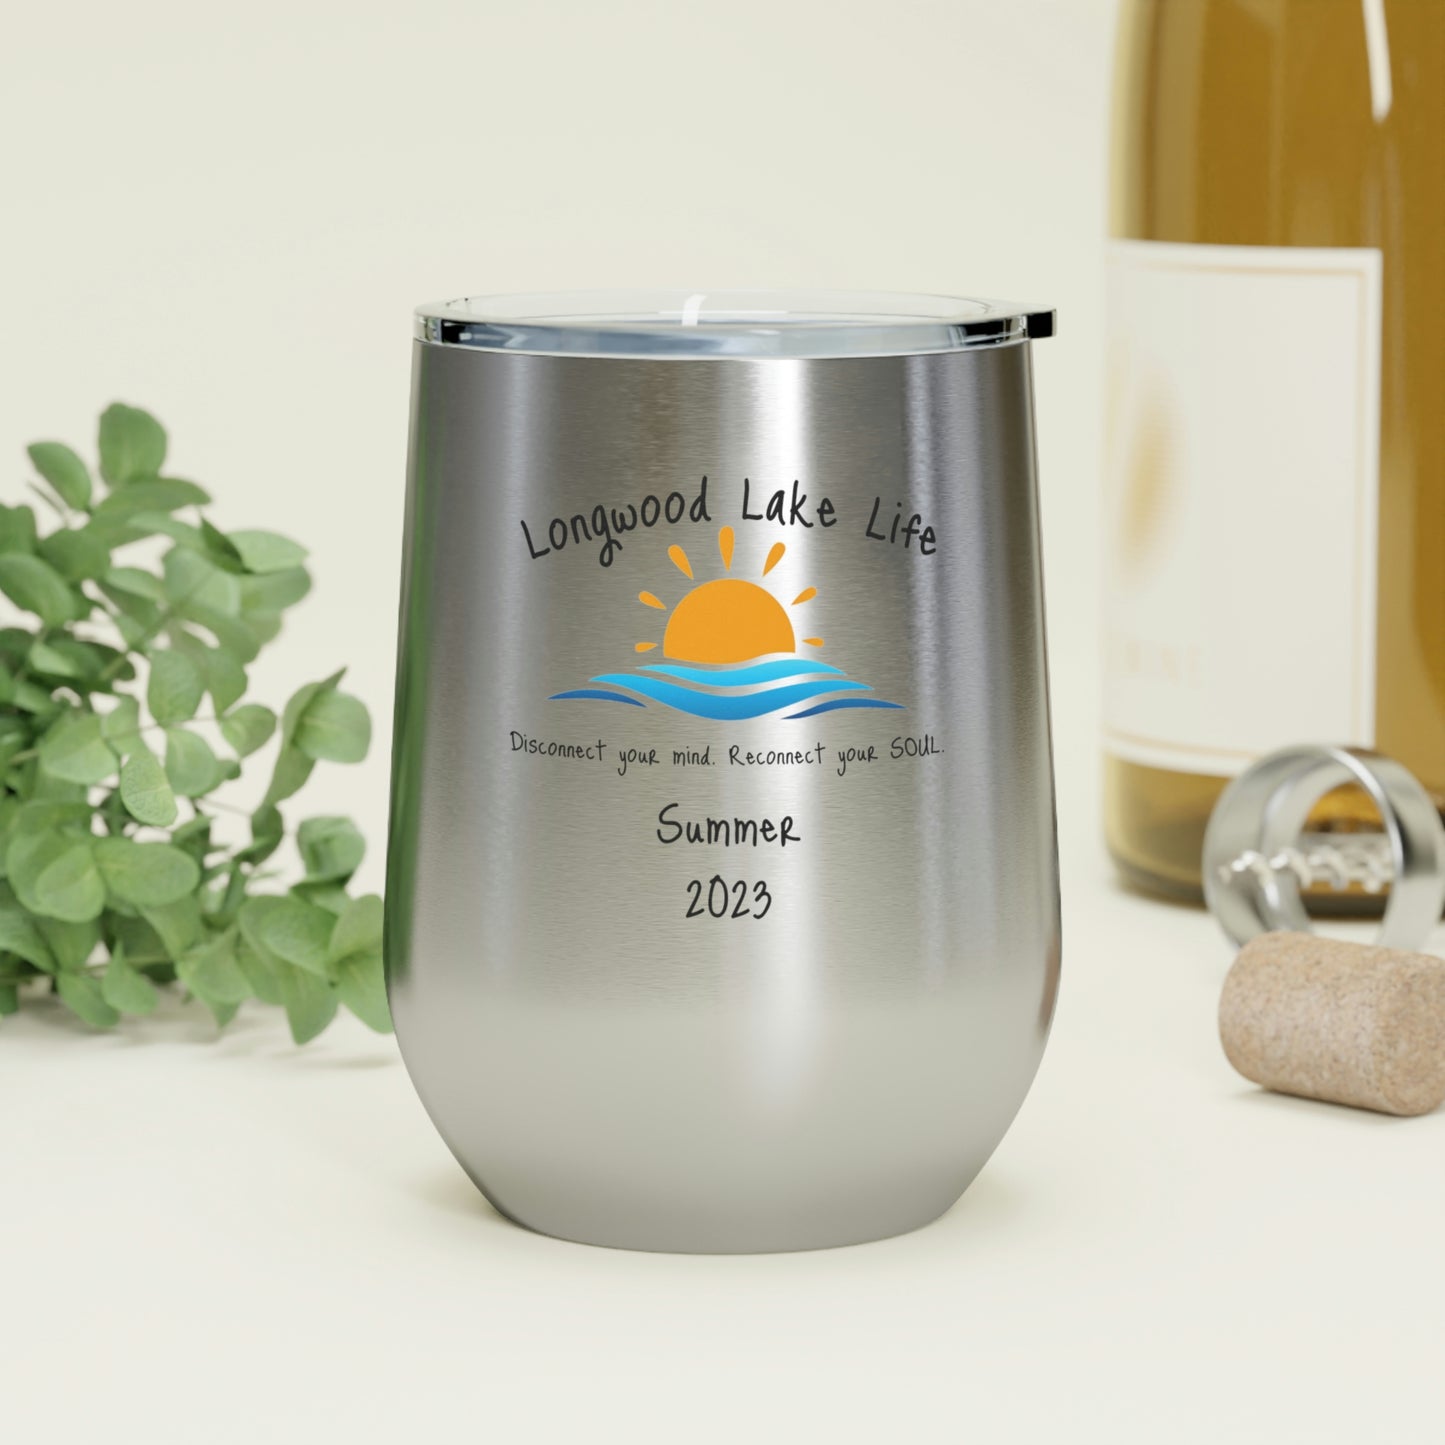 Longwood Lake Summer 2023 Special Edition 12oz Insulated Wine Tumbler